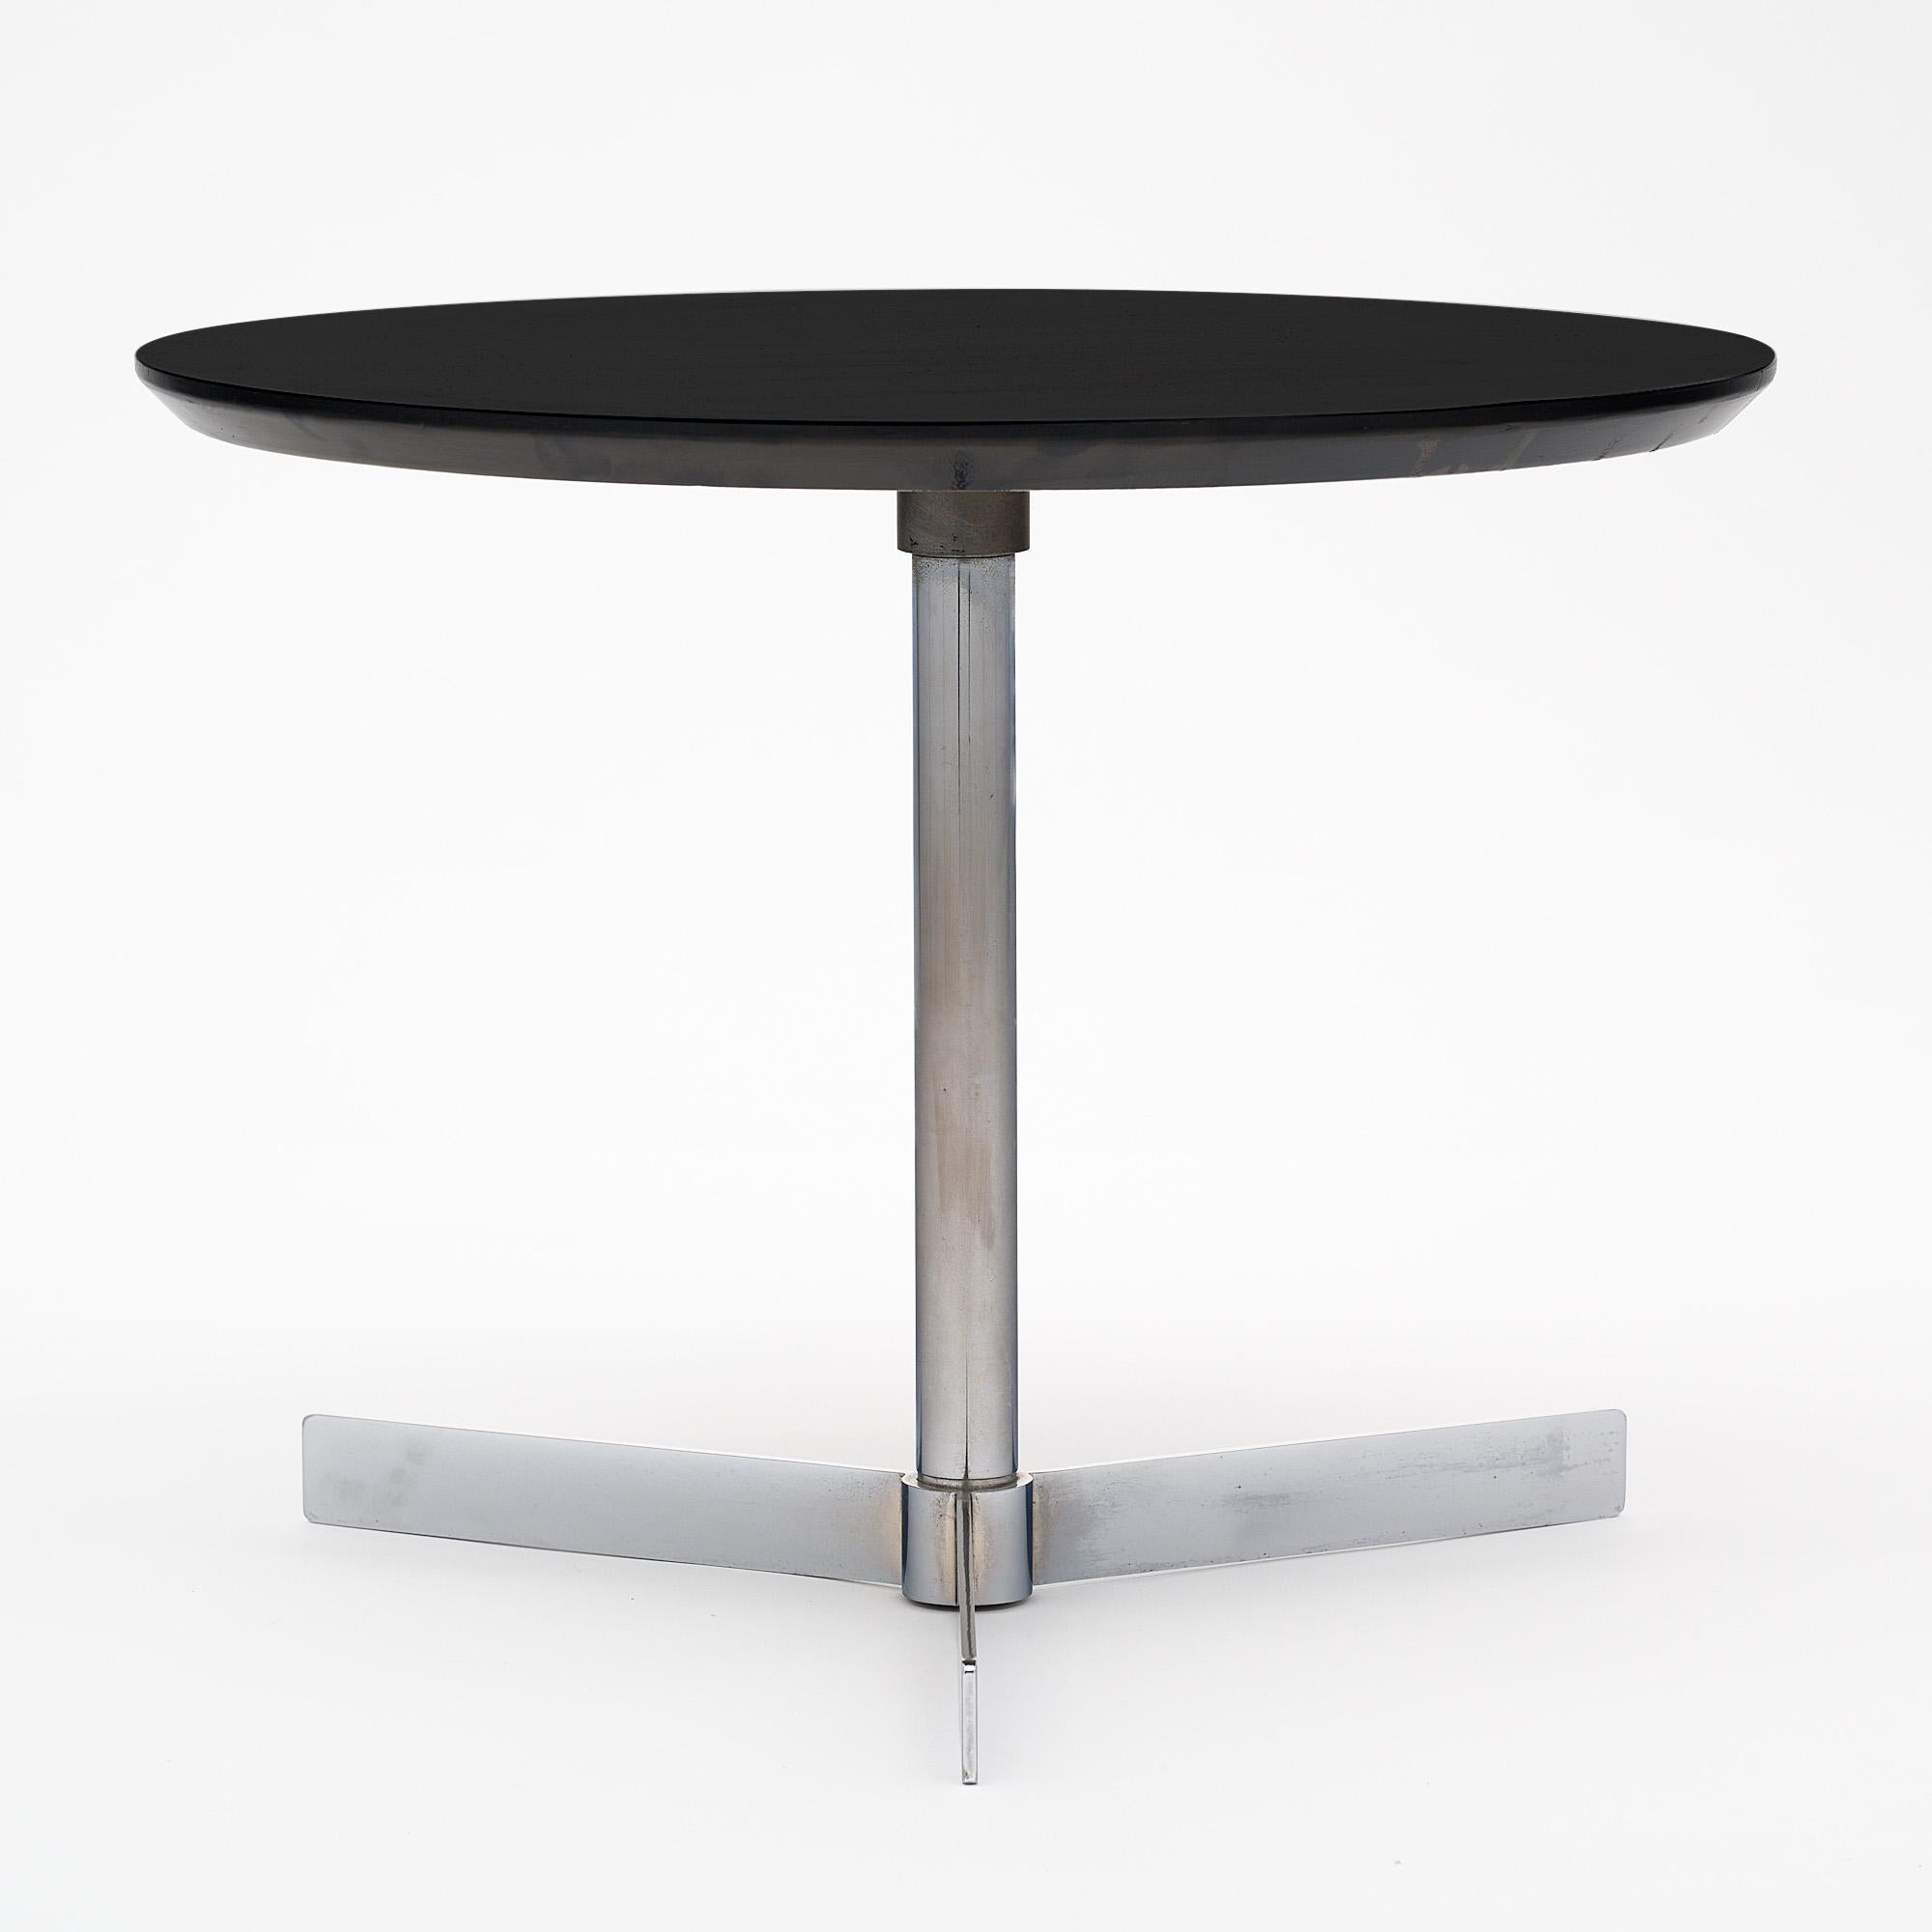 Mid-Century Modern side table, French, made with a tripod chromed steel base and a black lacquered wooden top.